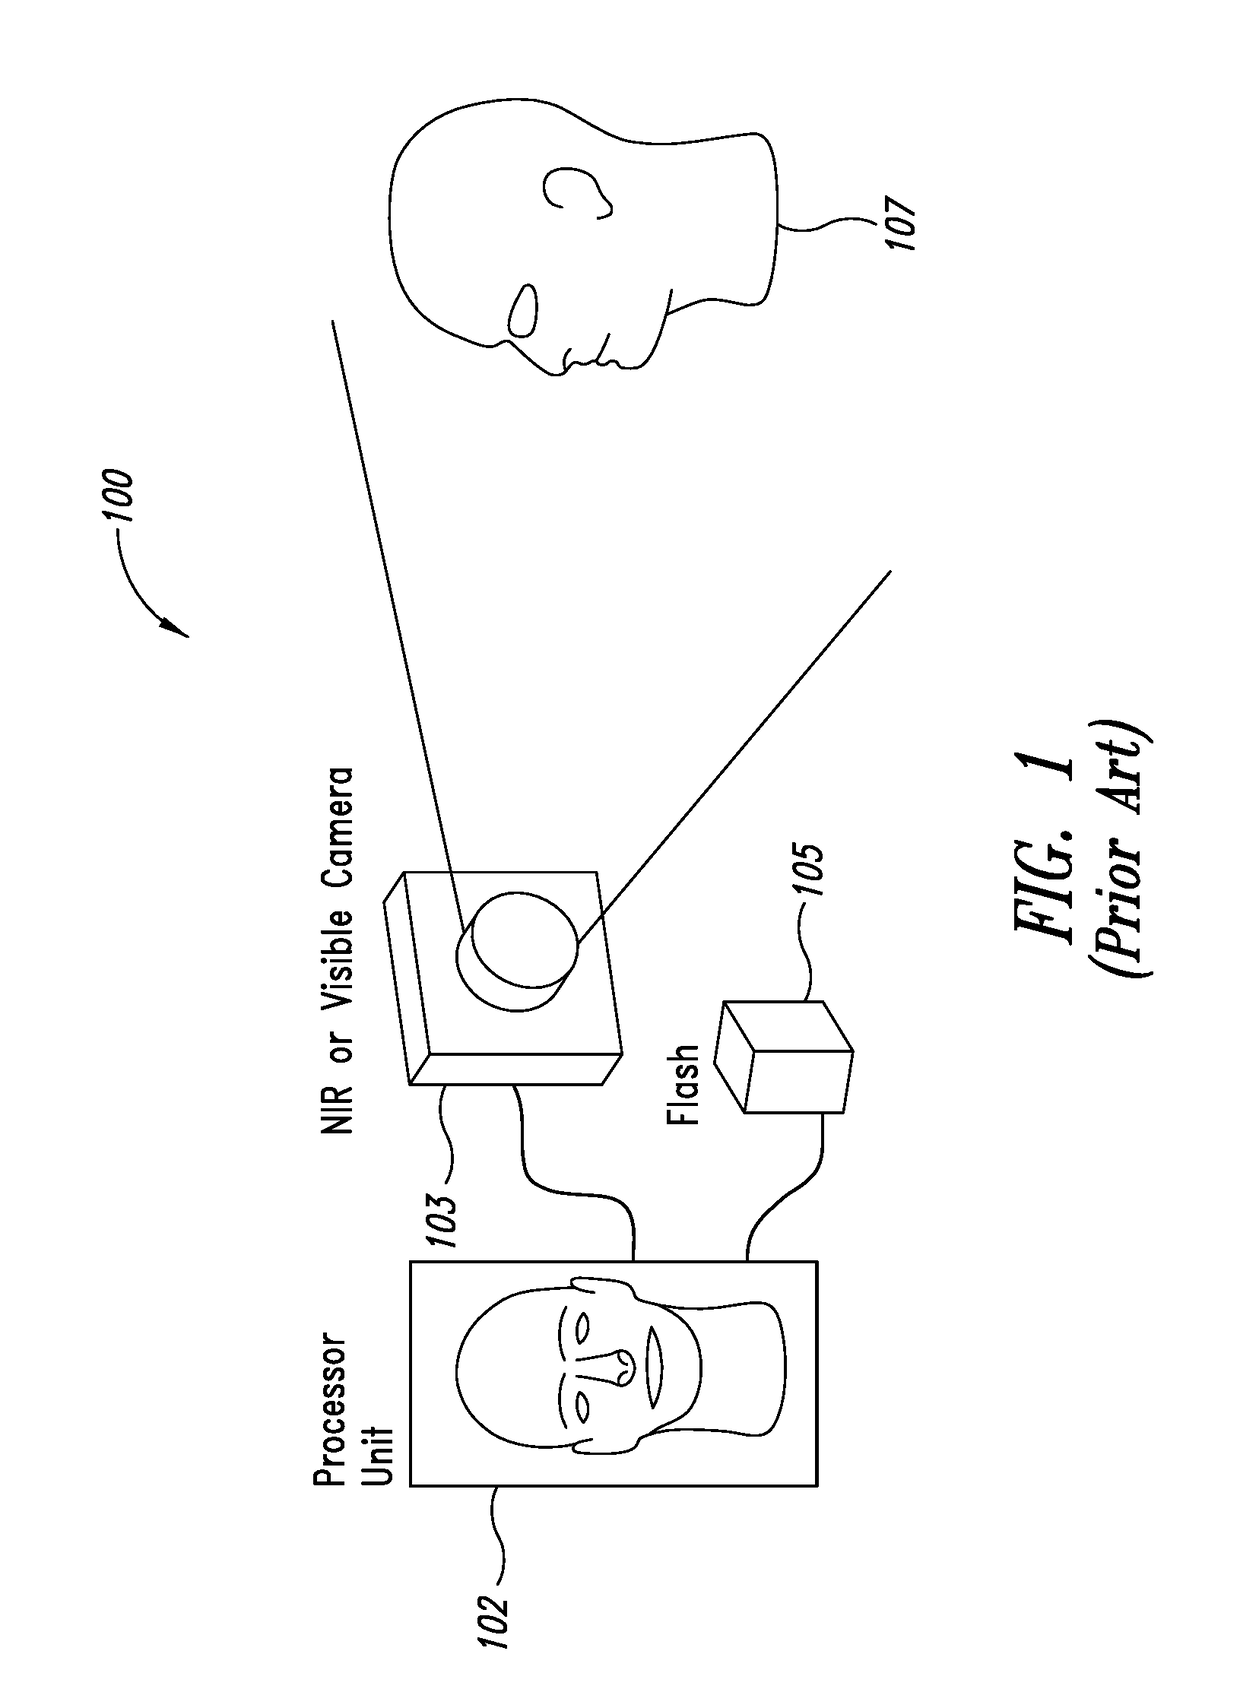 Image capturing apparatus, system and method